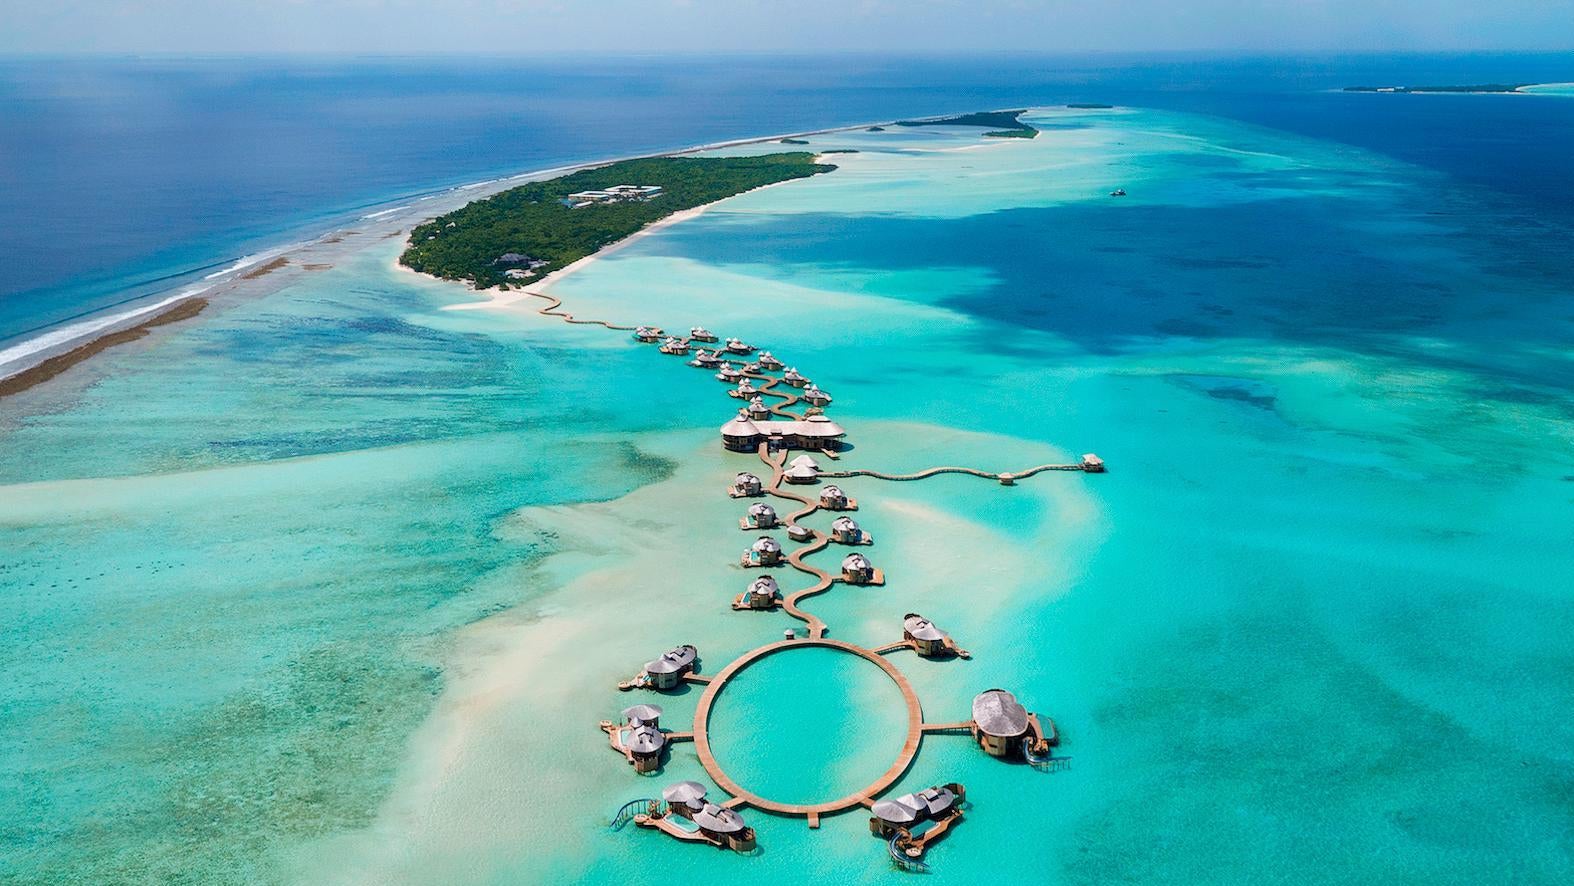 Here's How To Plan The Maldives Trip Of Your Post-Quarantine Dreams